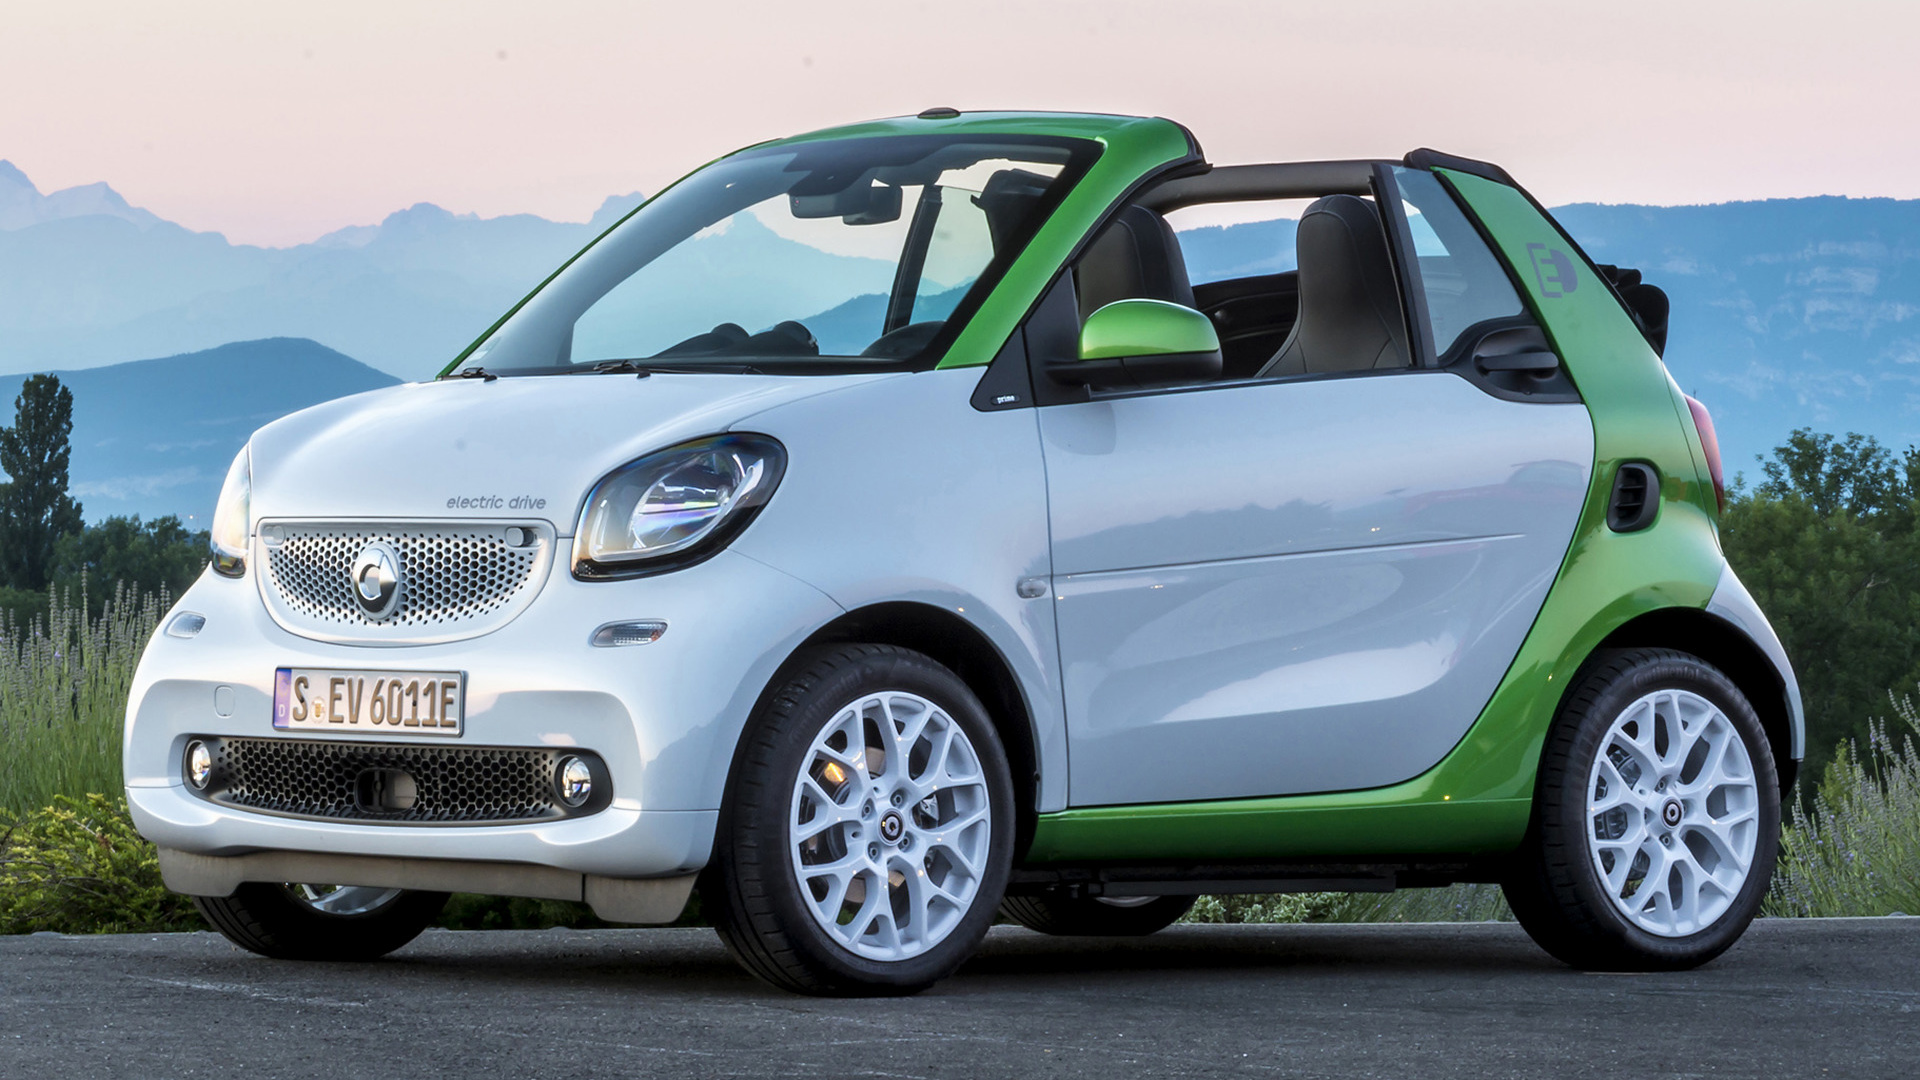 vehicles, smart fortwo, cabriolet, car, electric car